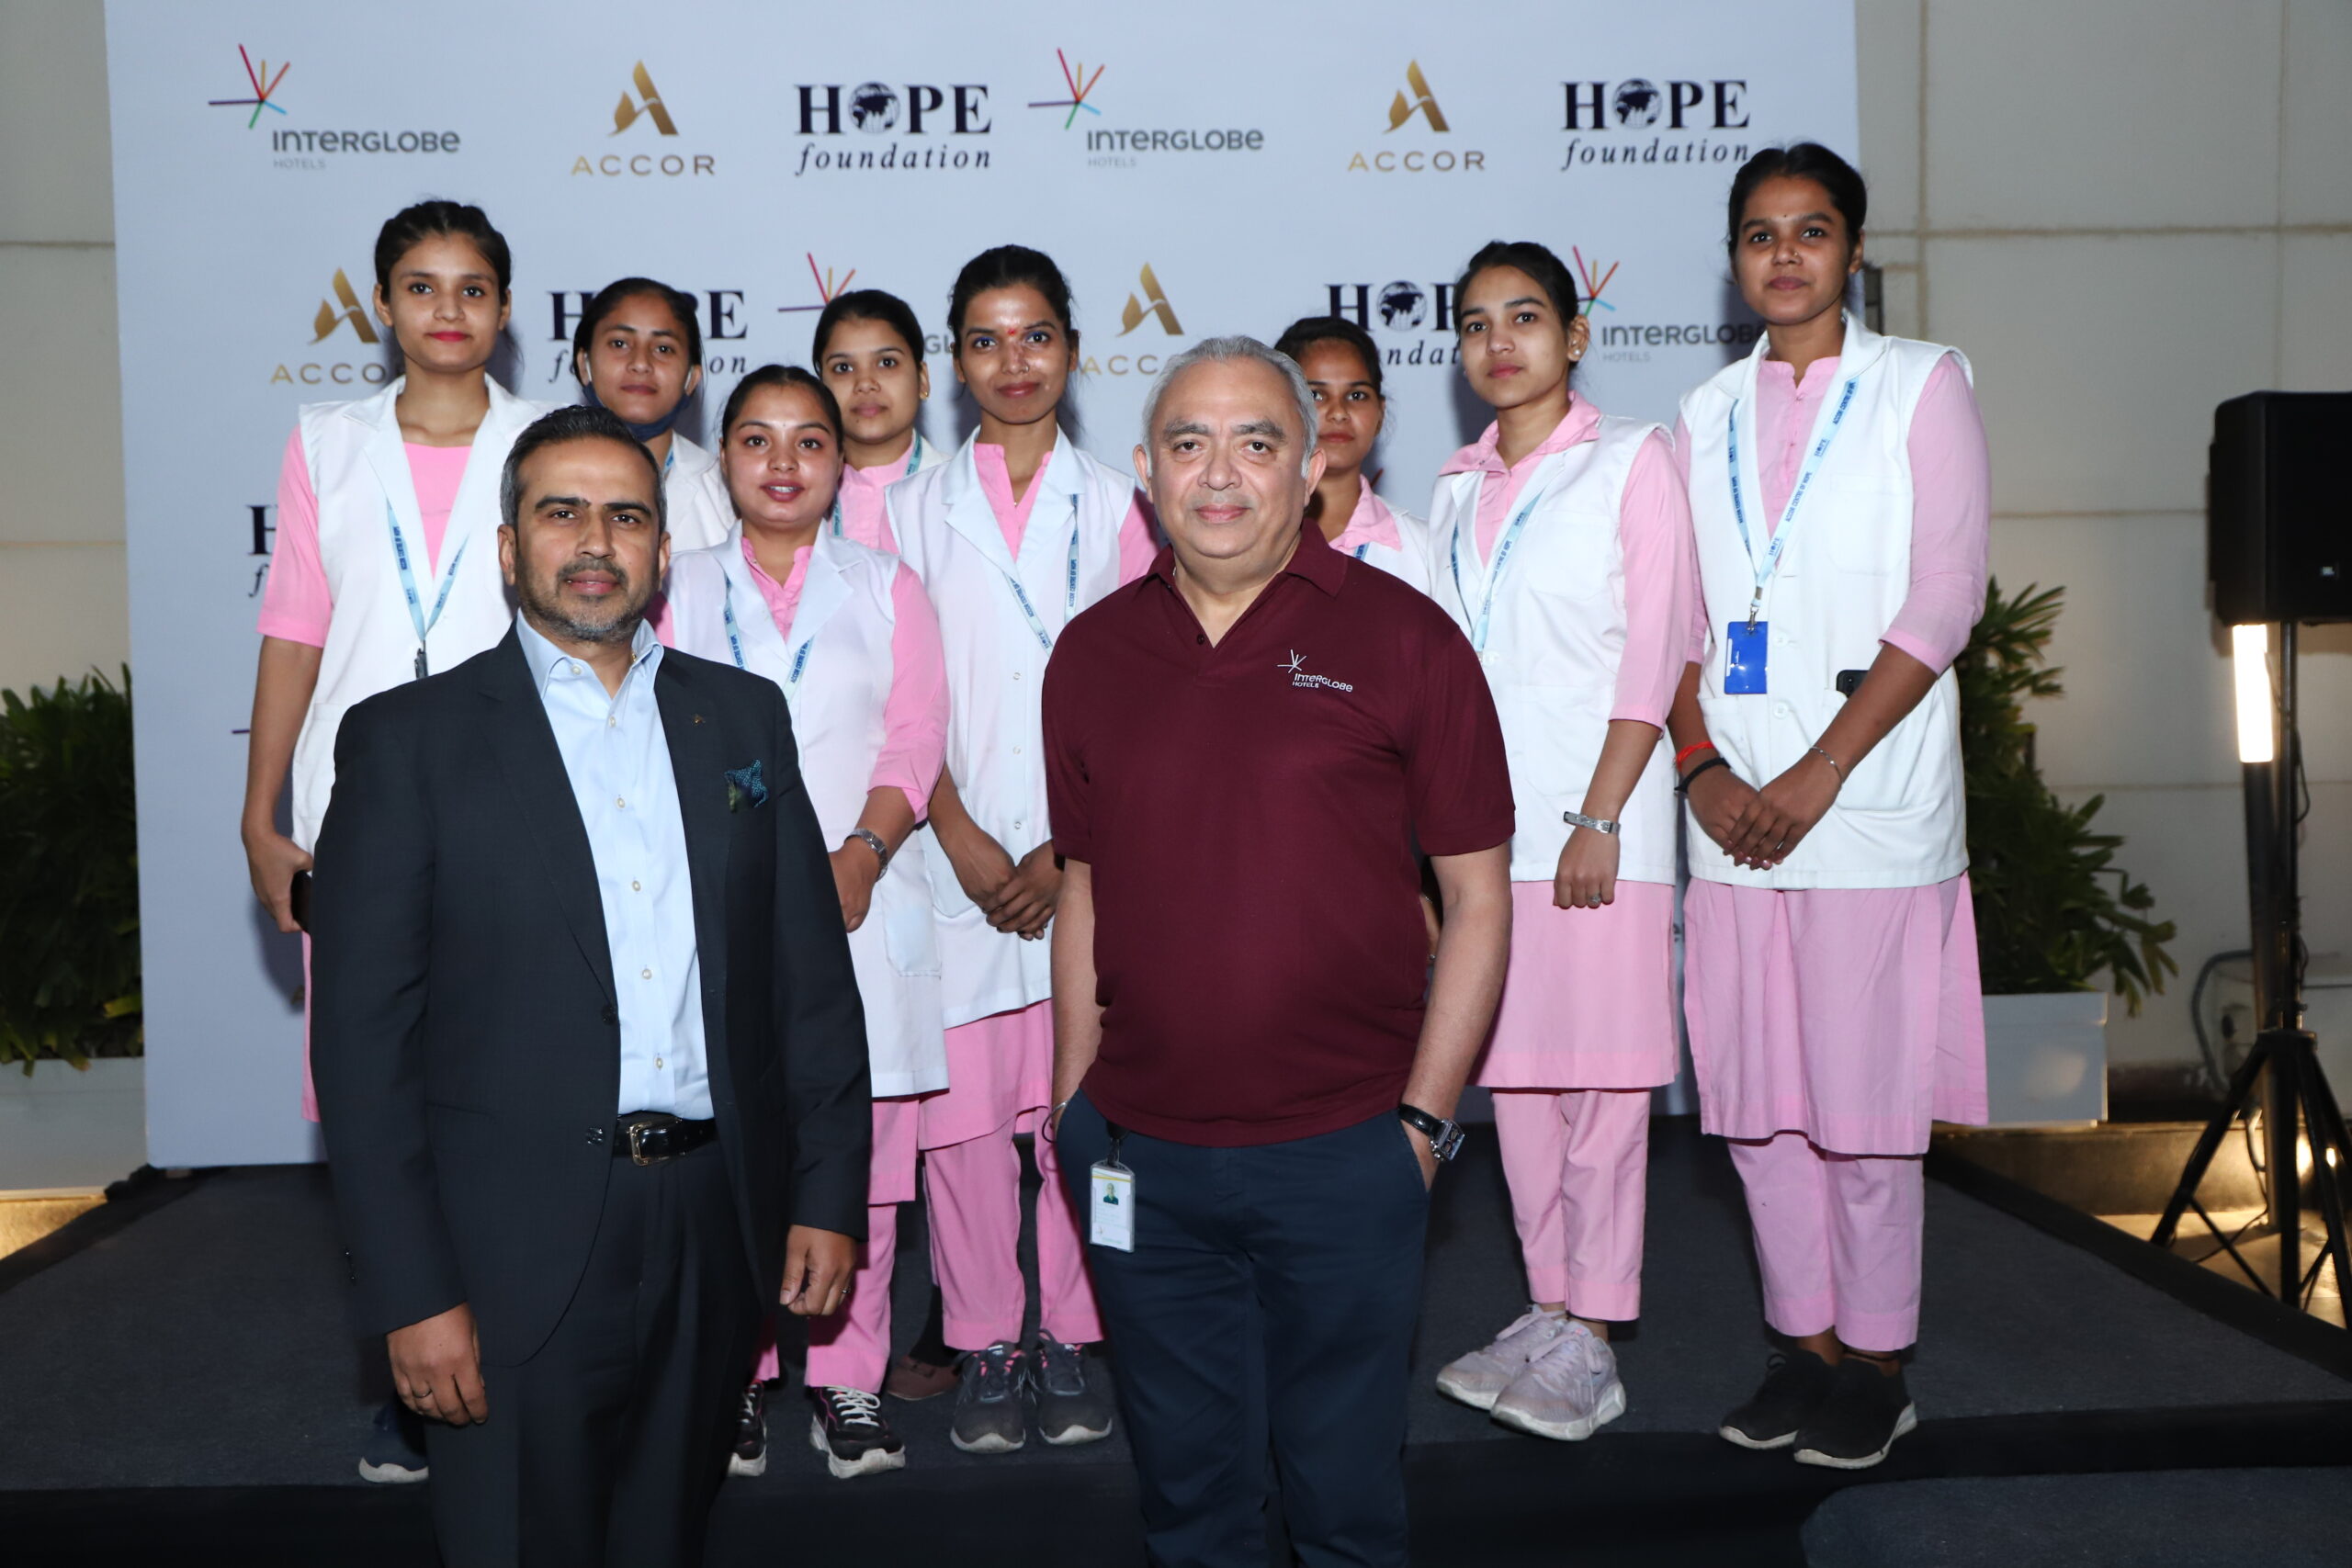 Accor India and InterGlobe Hotels hosts Graduation Ceremony for students of Nursing Assistant Program